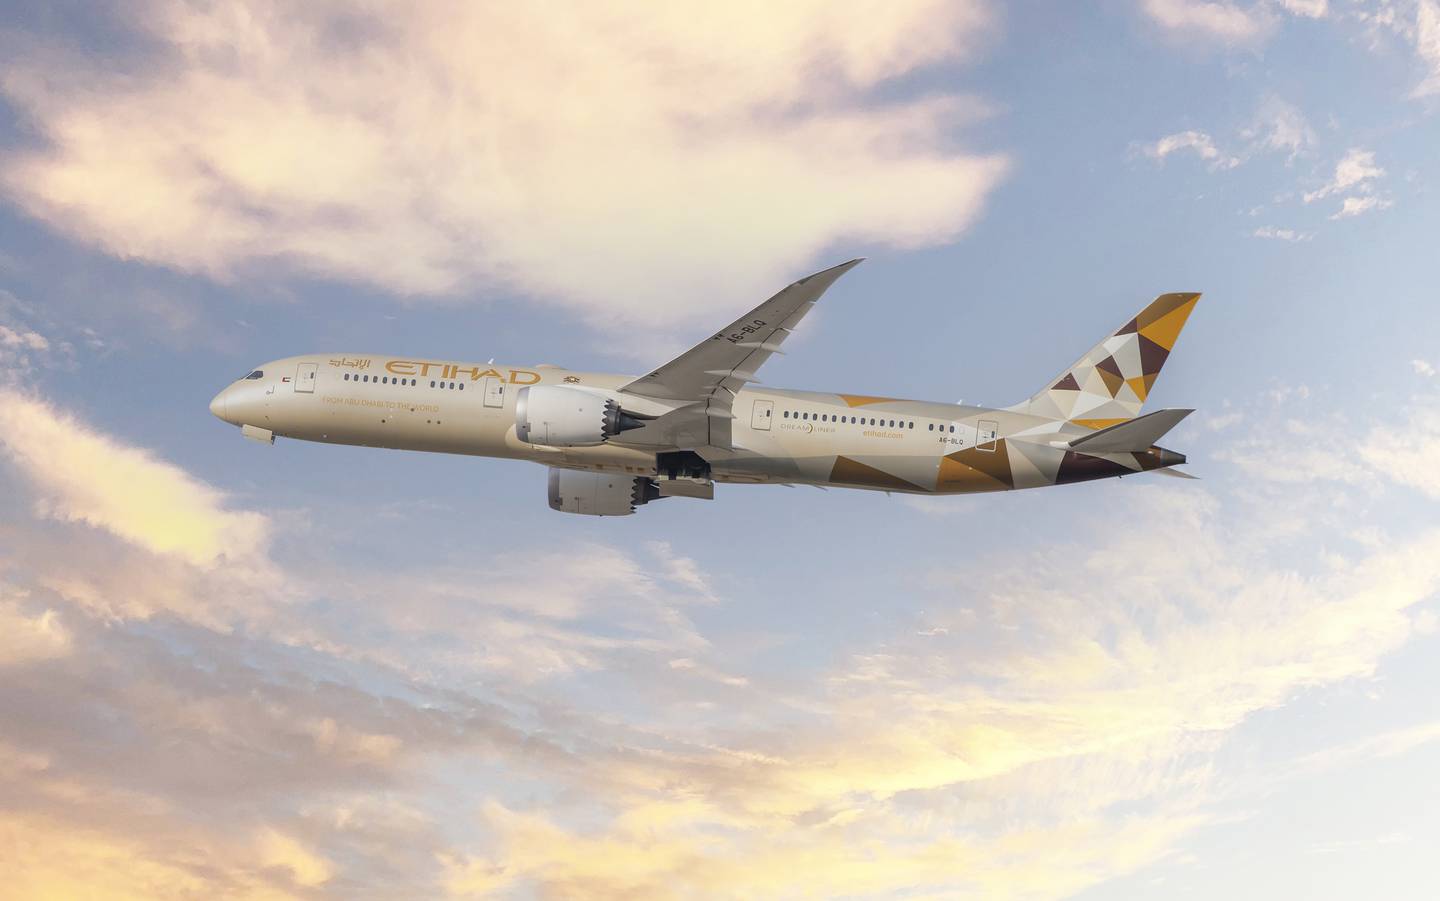 Flights will be operated on a Boeing 787 Dreamliner aircraft. Photo: Etihad